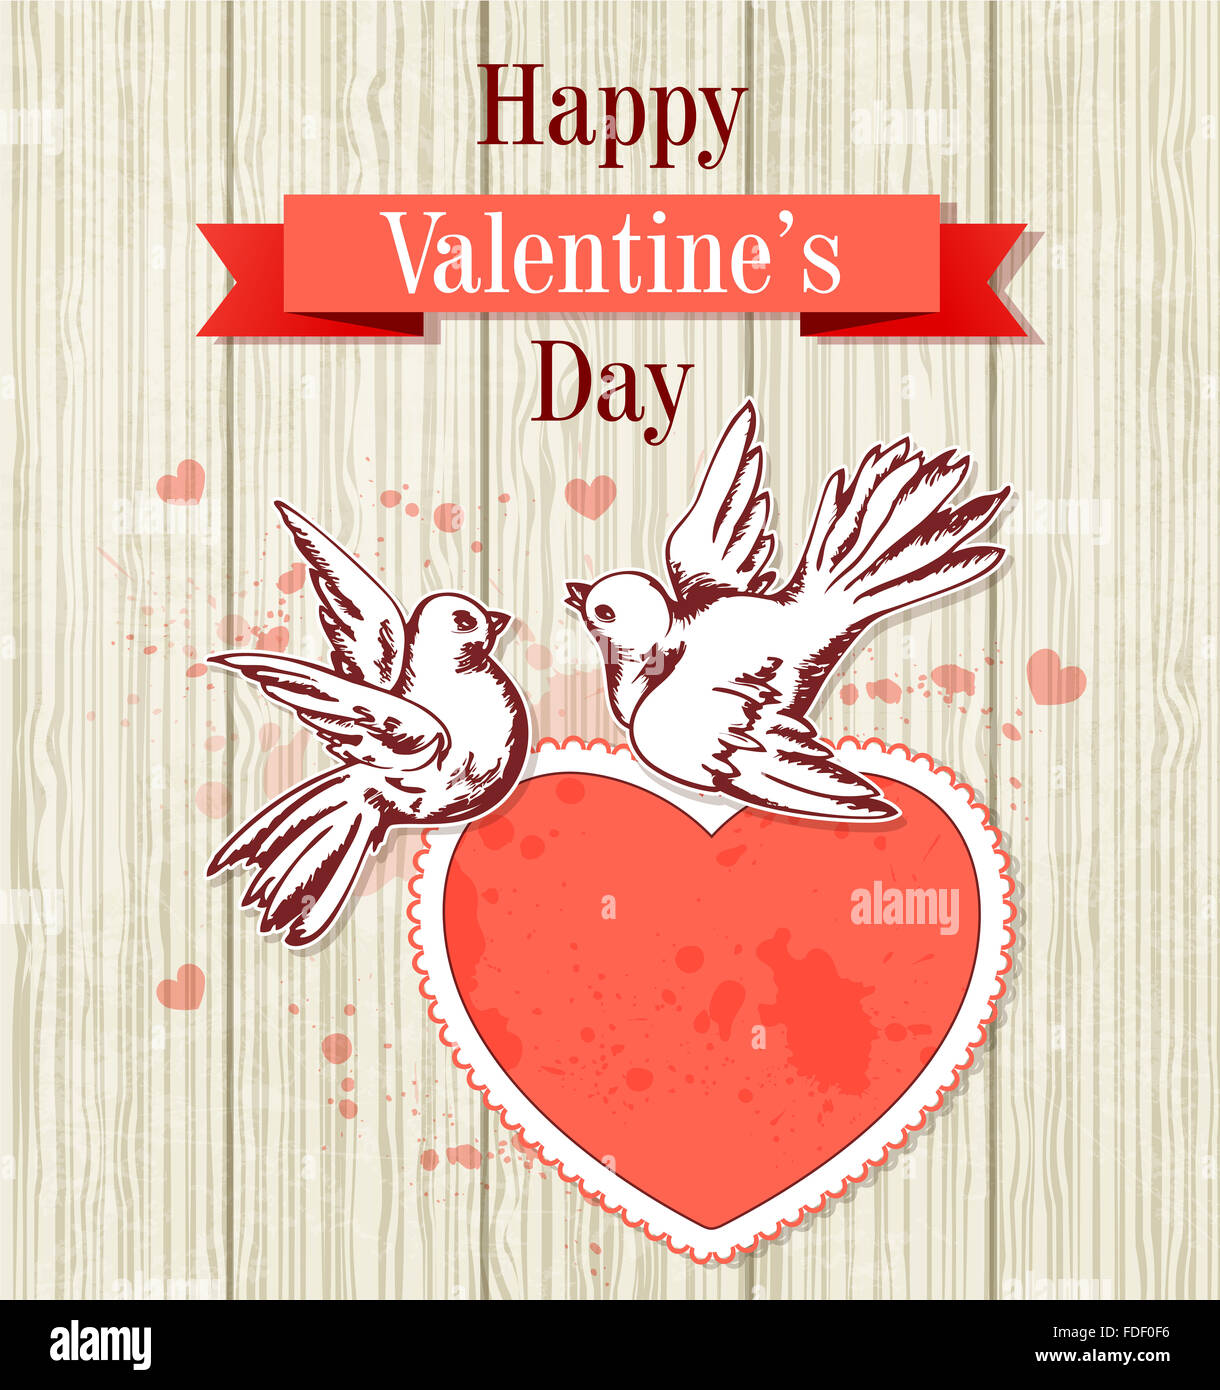 Vintage hand drawn Valentine card with two doves and red heart Stock Photo